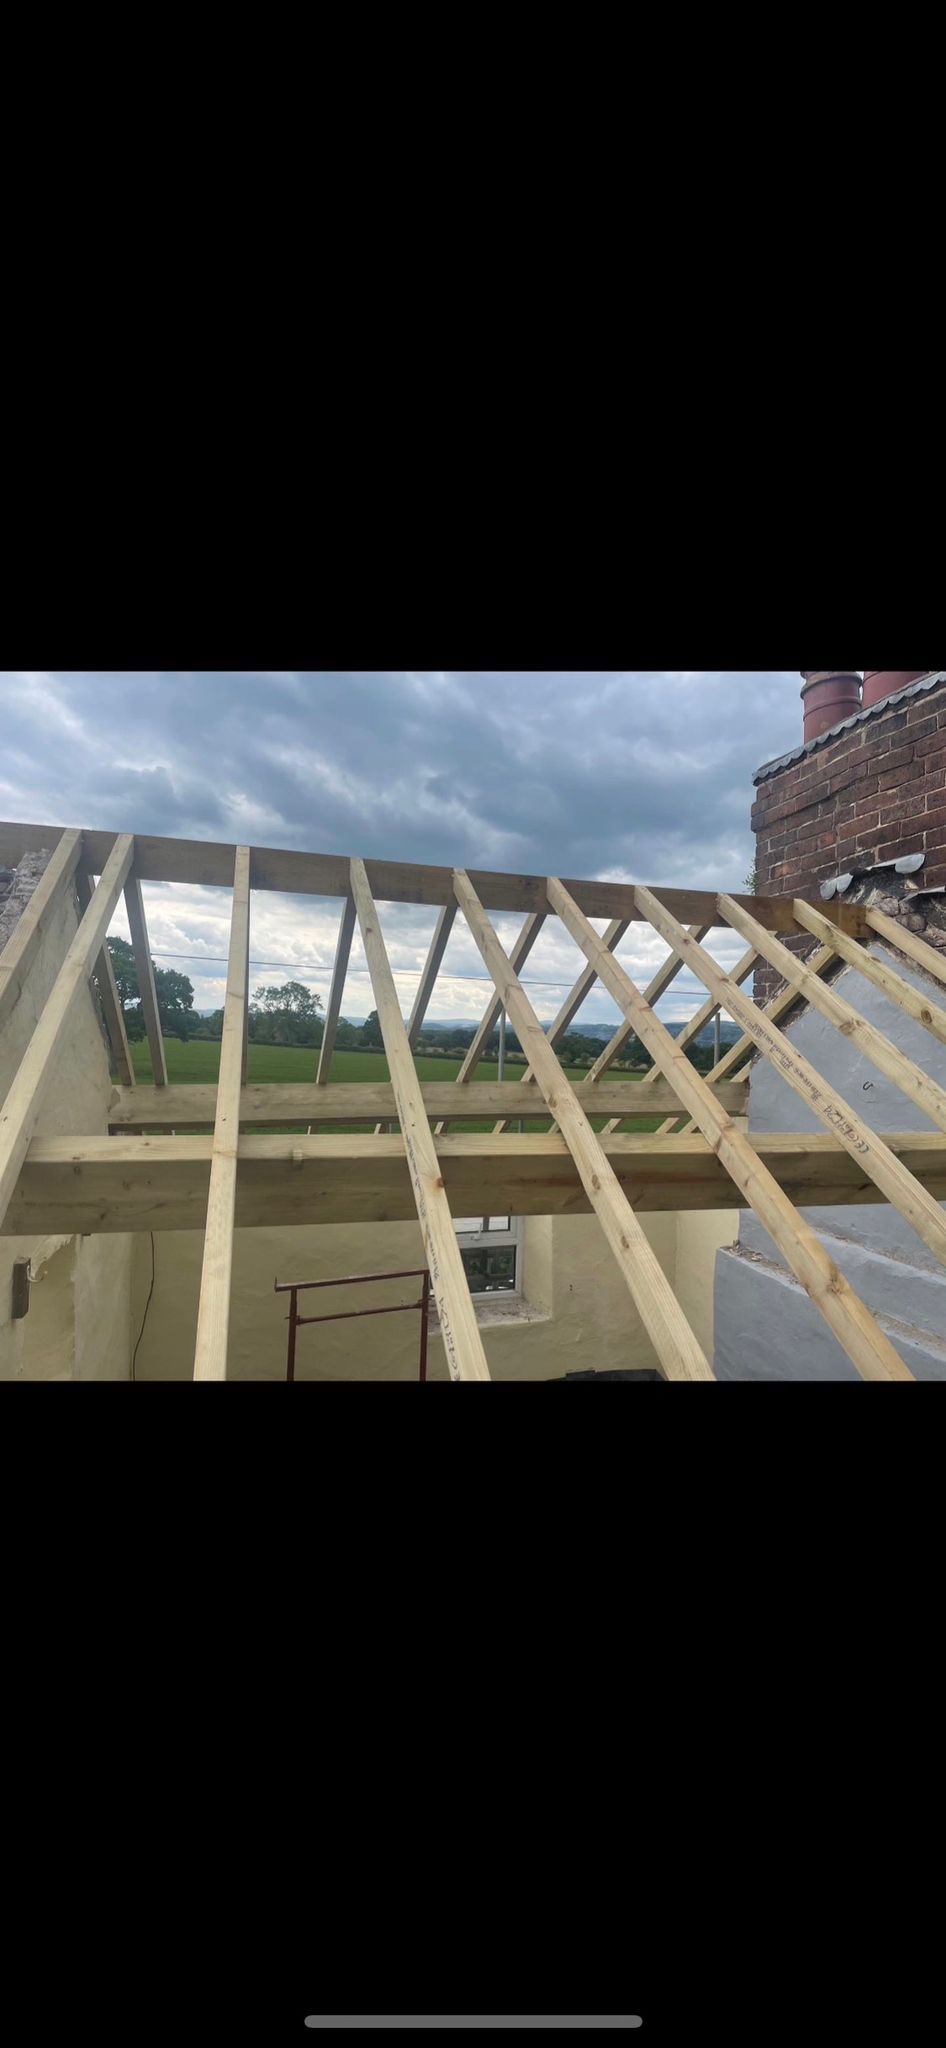 Timberwork Roof Contractors Llanystumdwy, LL52 - DD Roofing